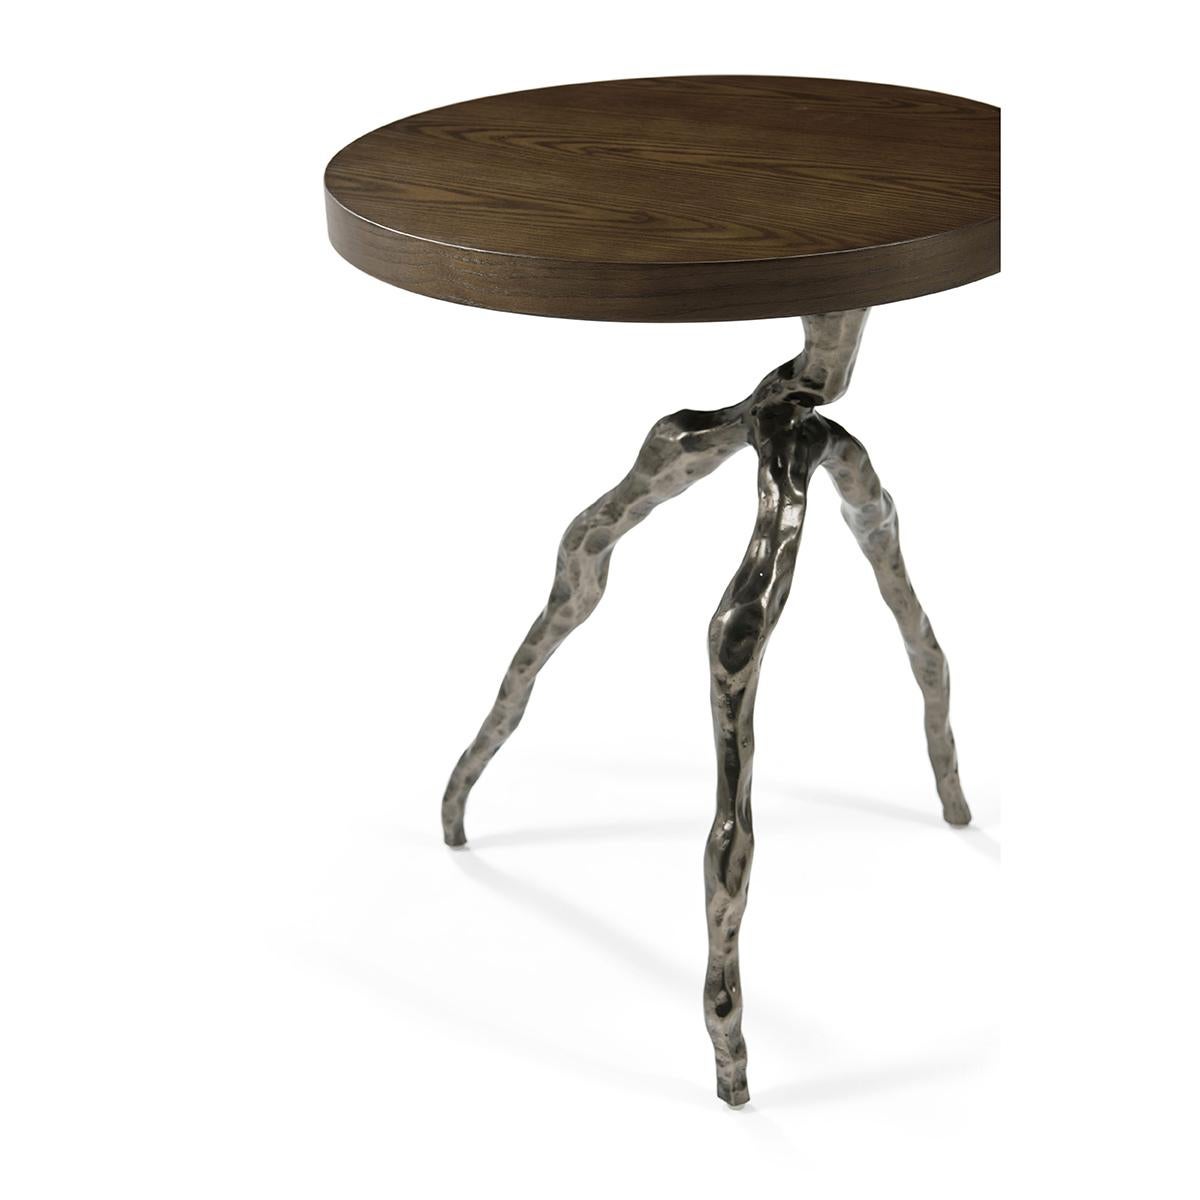 Contemporary Modern Faux Bois Accent Table - Earth Finish For Sale